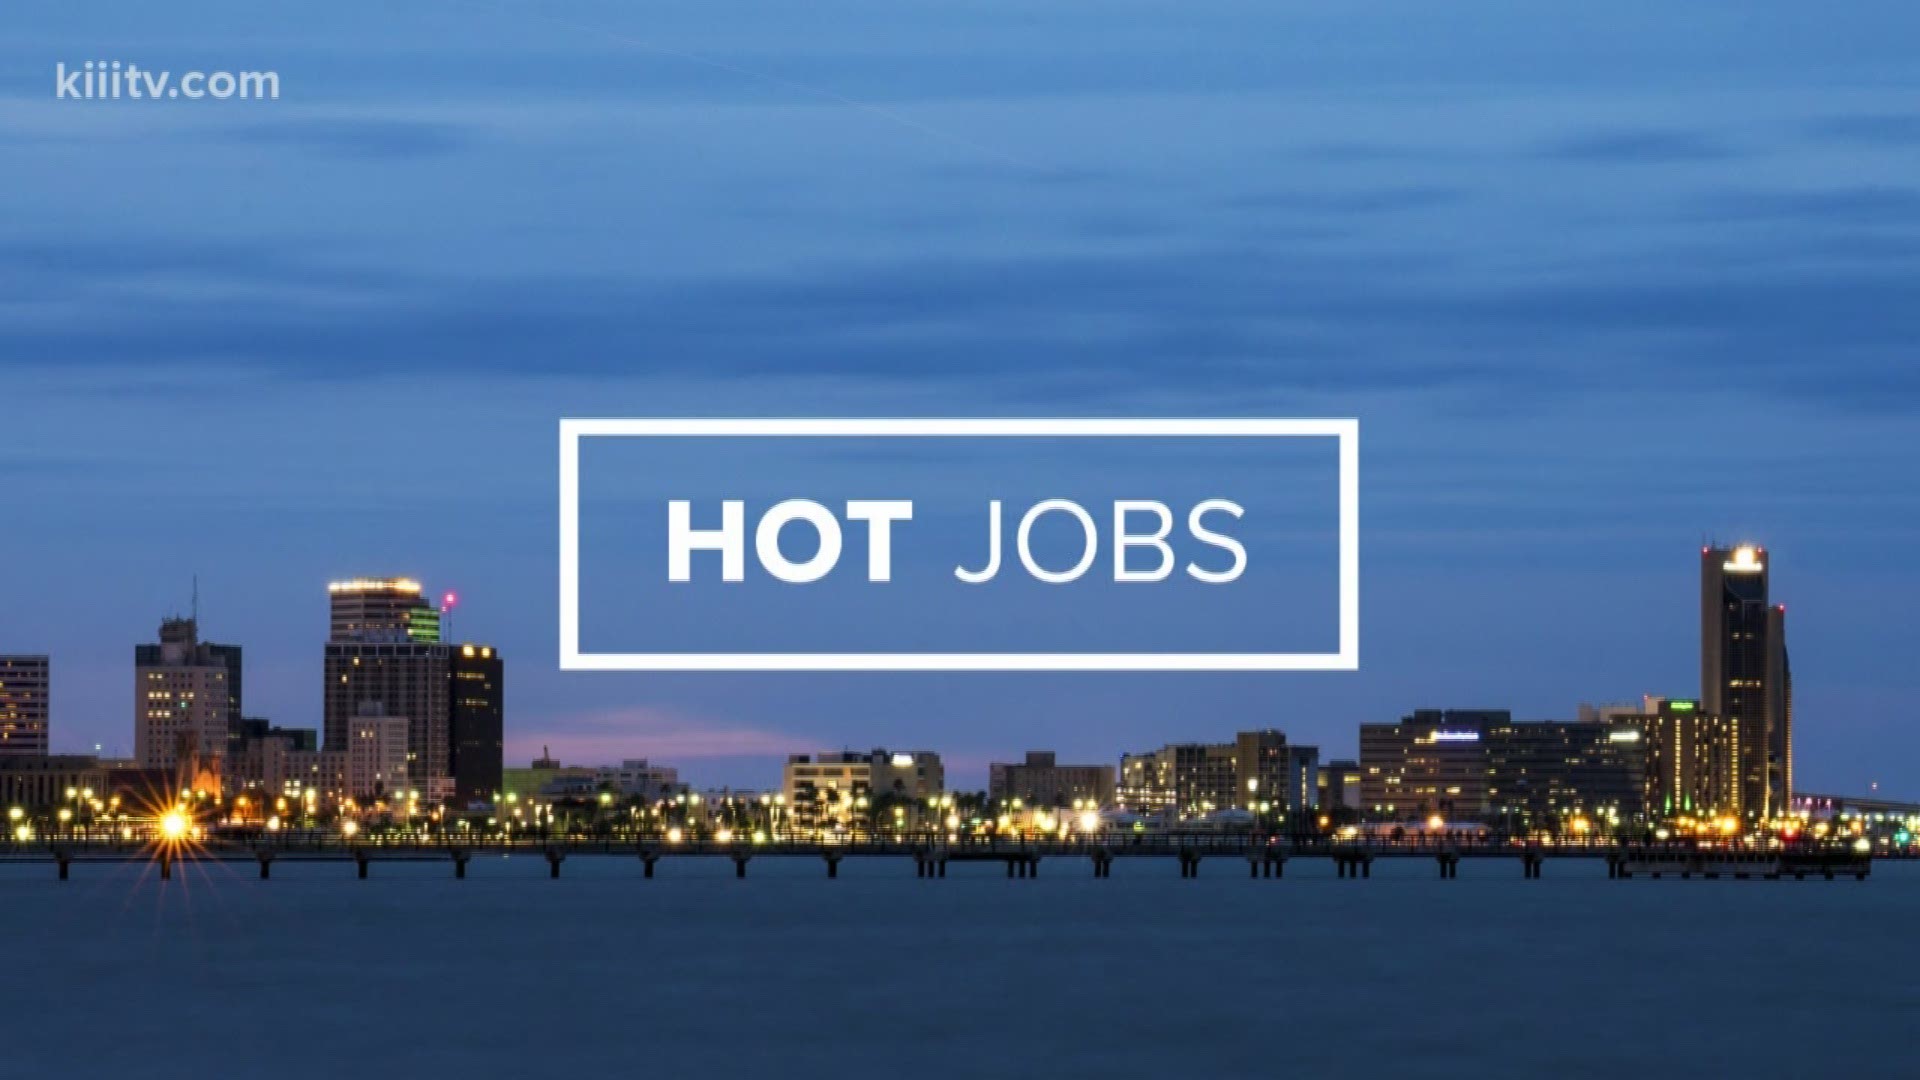 It's time now for our weekly Hot Jobs report brought to you by Workforce Solutions of the Coastal Bend.